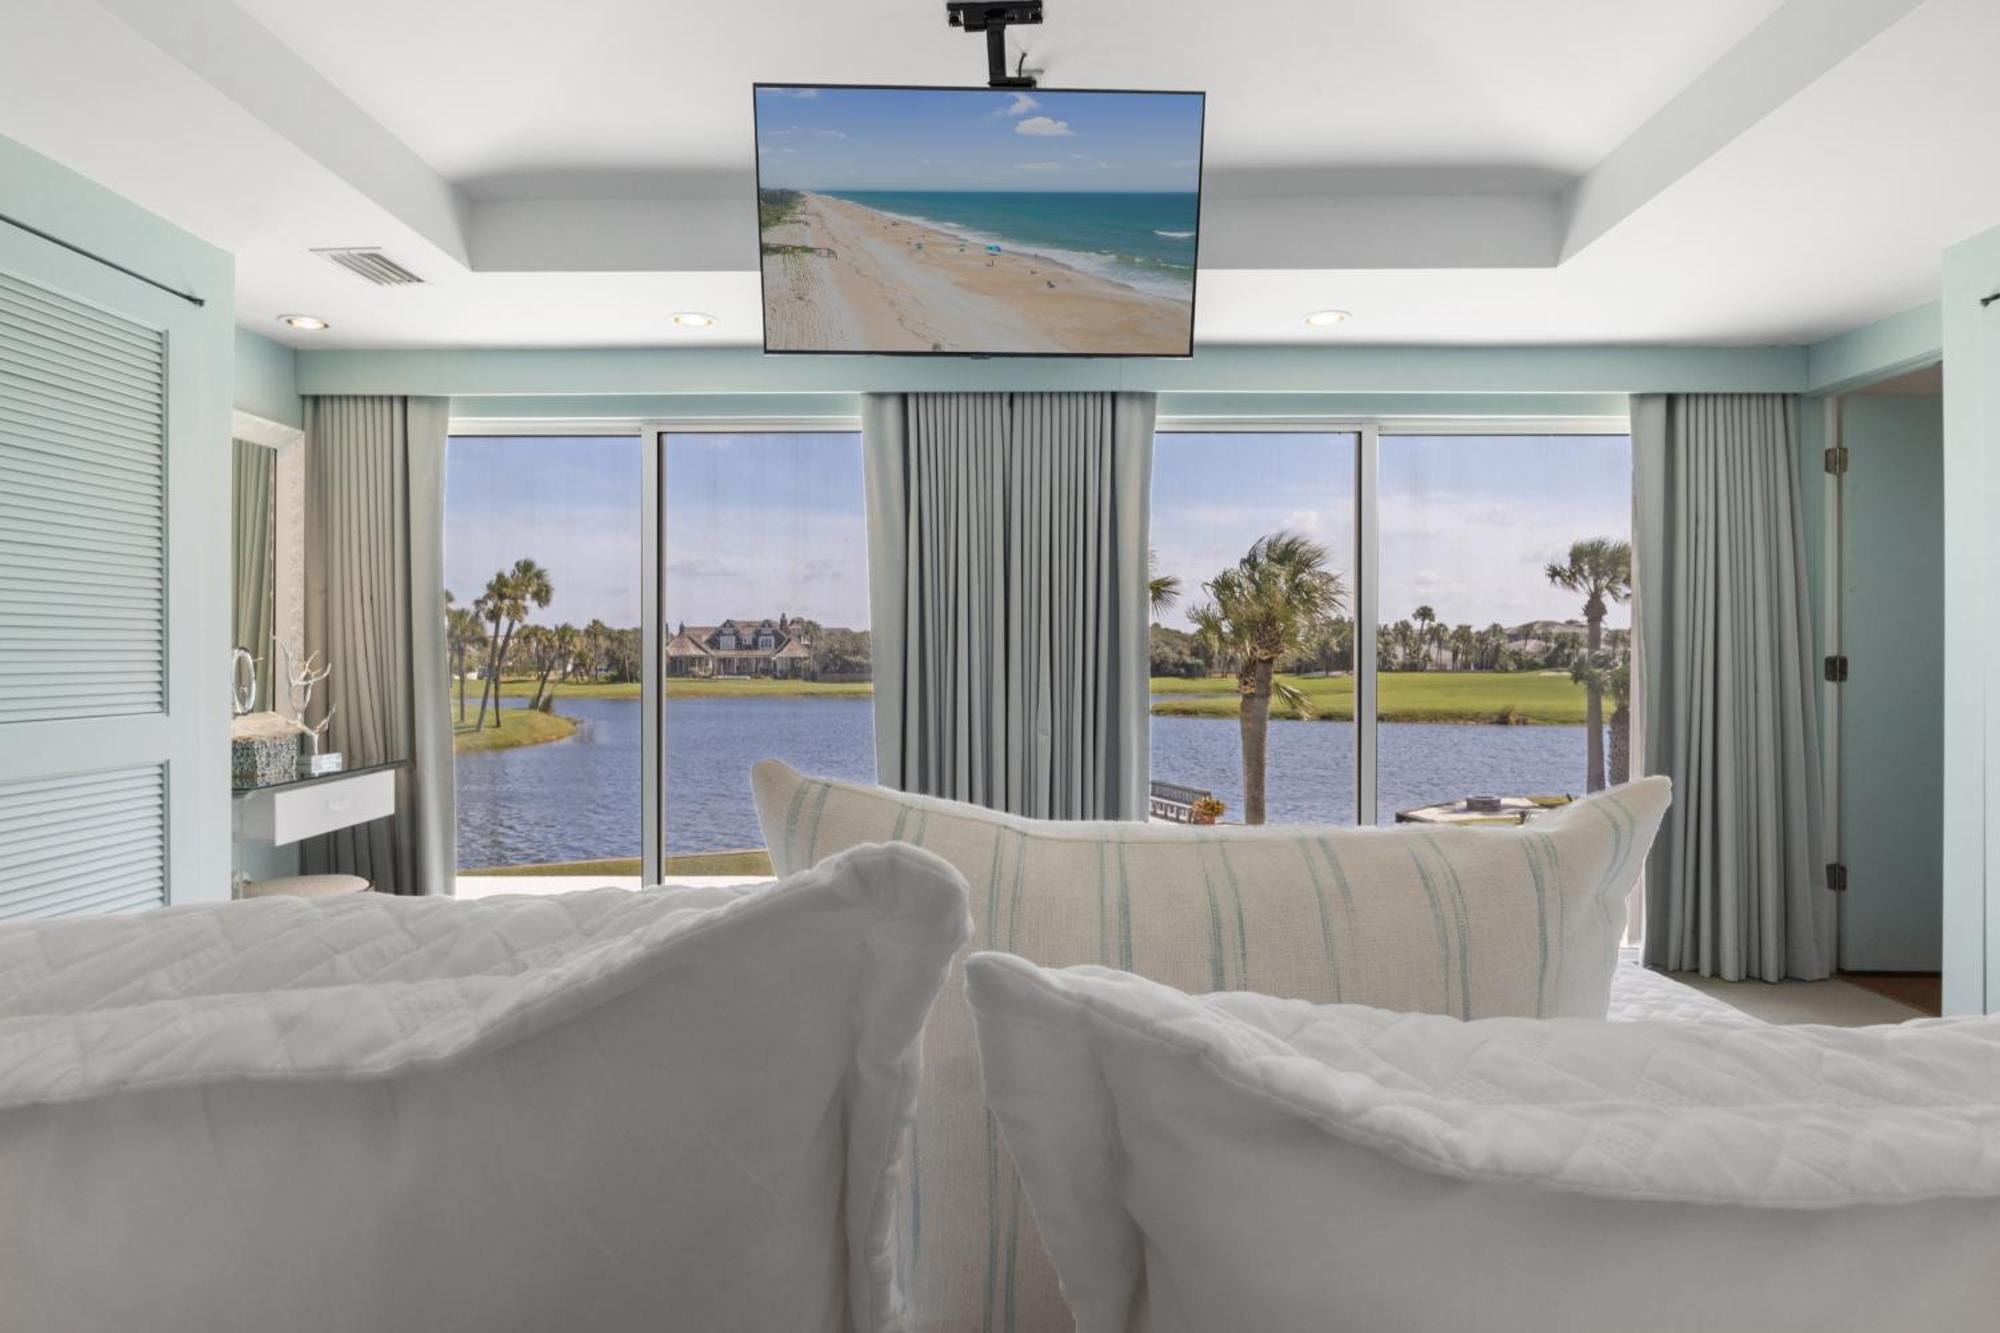 The Spacious Beach House Within 5-Minutes Walk To Ponte Vedra Beach, Close Mayo Clinic, And Tpc Sawgrass 外观 照片